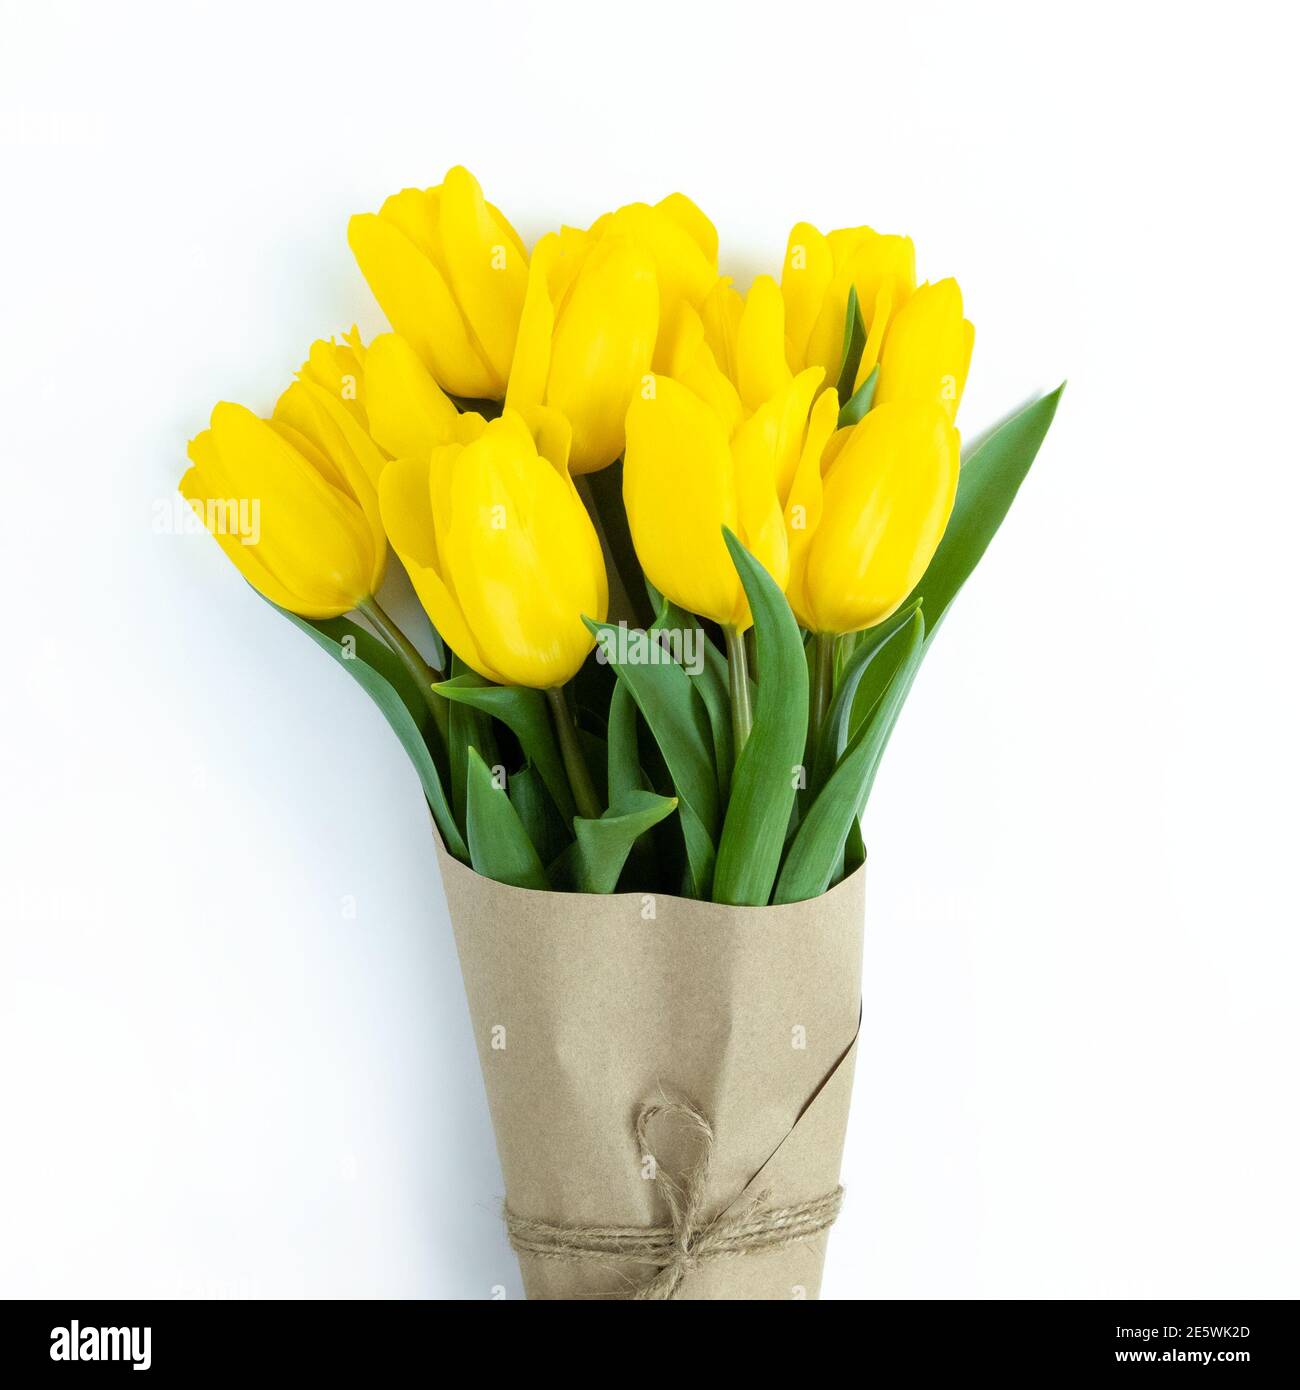 Bouquet of yellow tulips wrapped in craft paper on a white background. Stock Photo